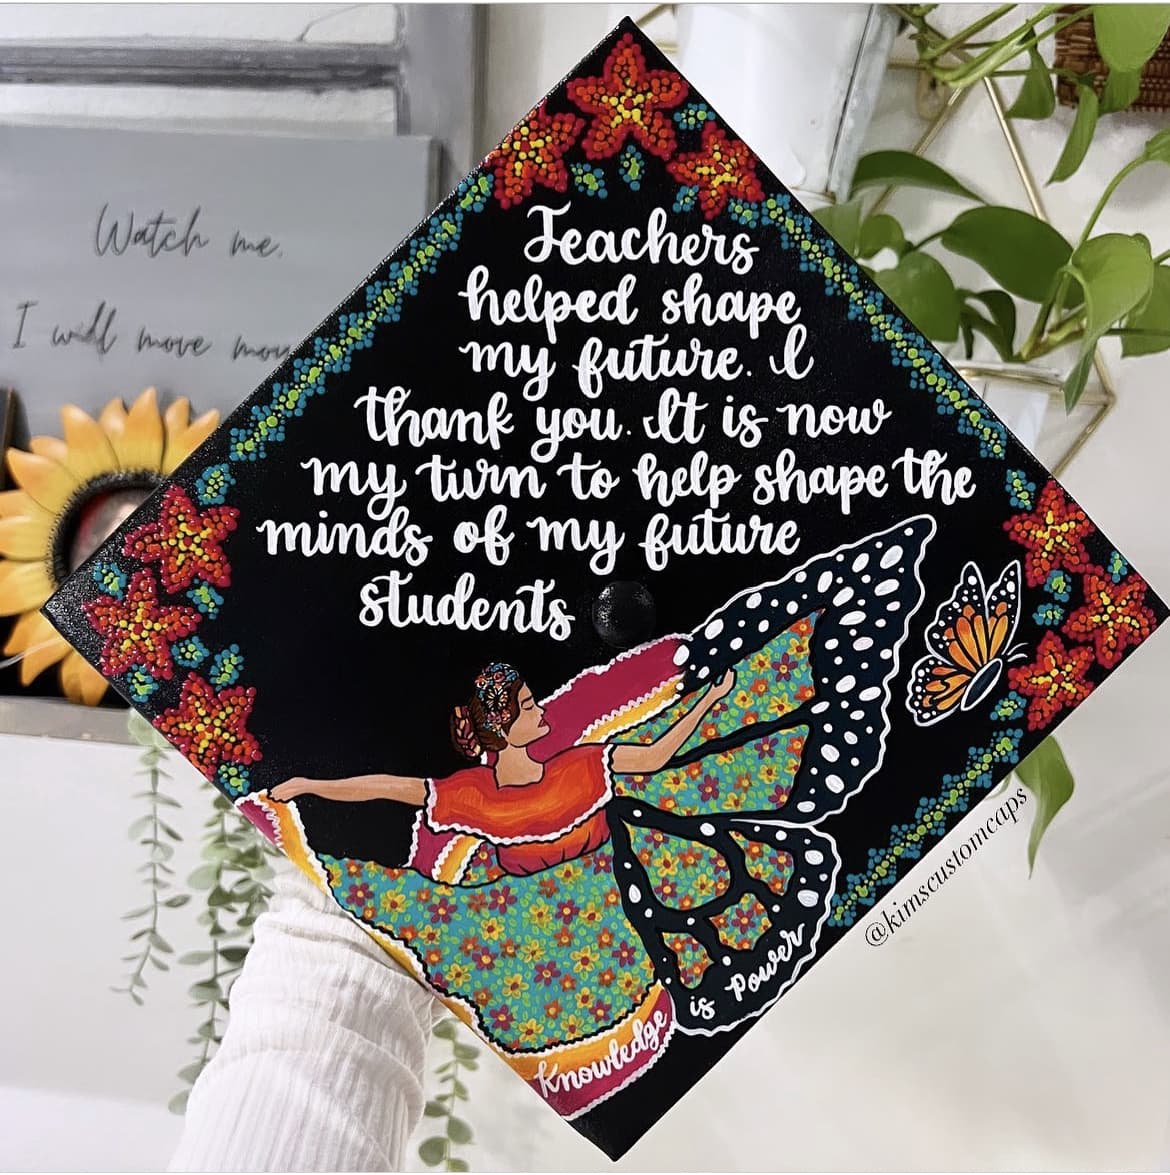 She Believed She Could, Custom Class Year Graduation Cap Topper